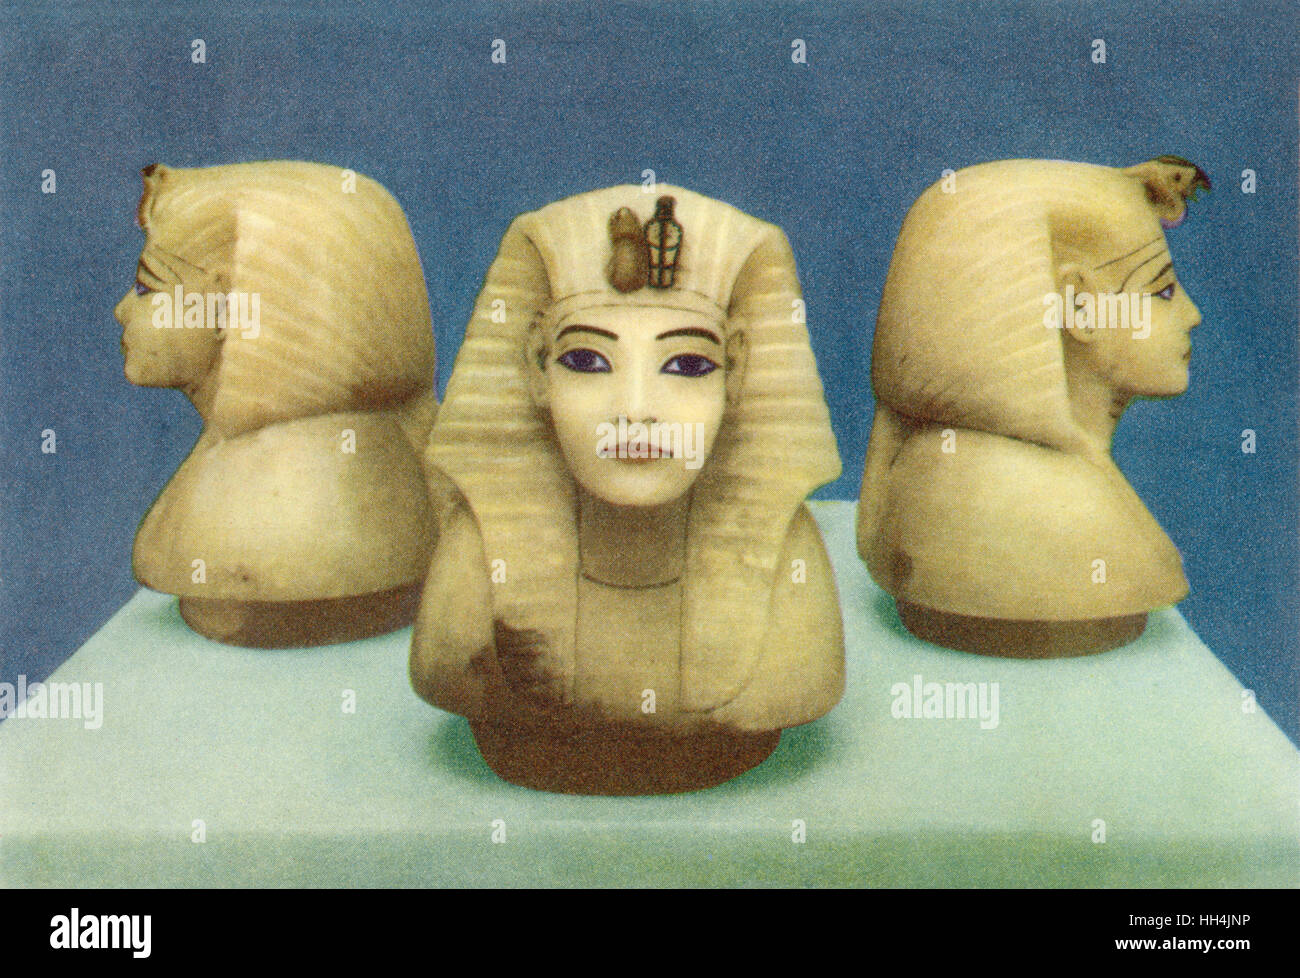 Three Alabaster heads portraying Tutankhamun (reigned 1332–1323 BC) from his tomb, as discovered by Howard Carter among others in 1922 in the Valley of Kings. The heads served as lids for the compartments of the canopic chest which contained the king's vi Stock Photo